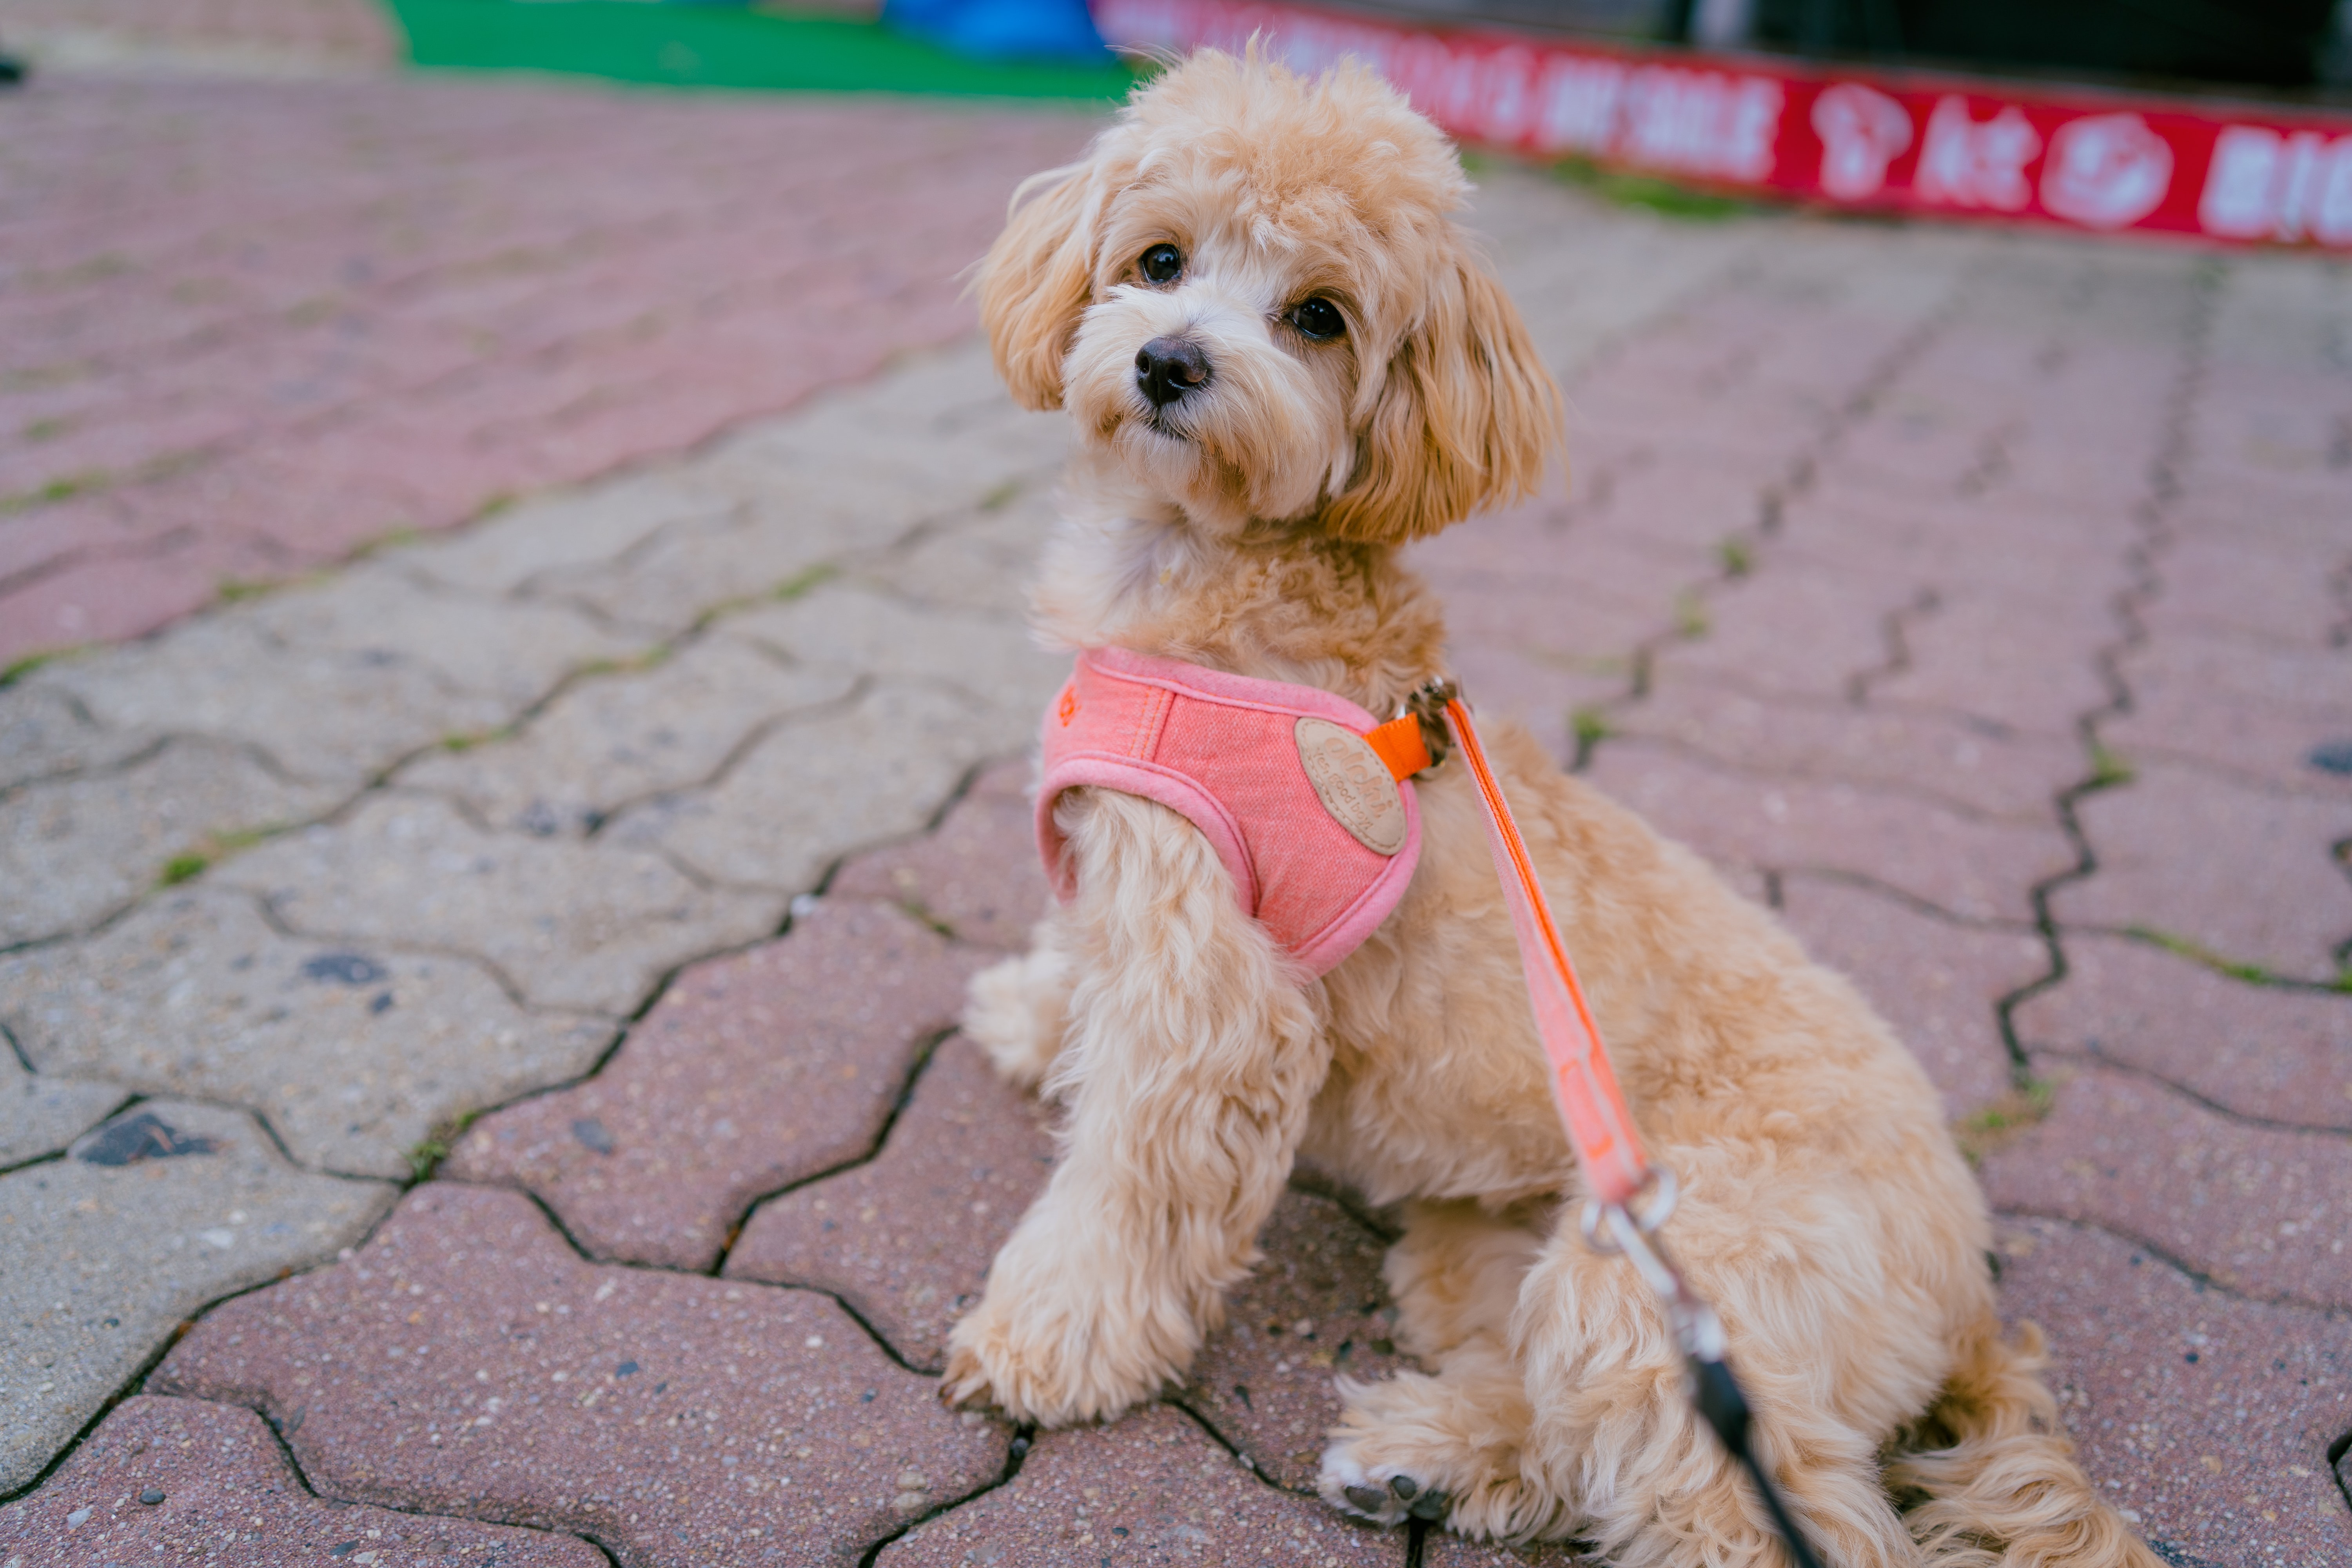 dog wearing a pink harness and leash sitting on pavement